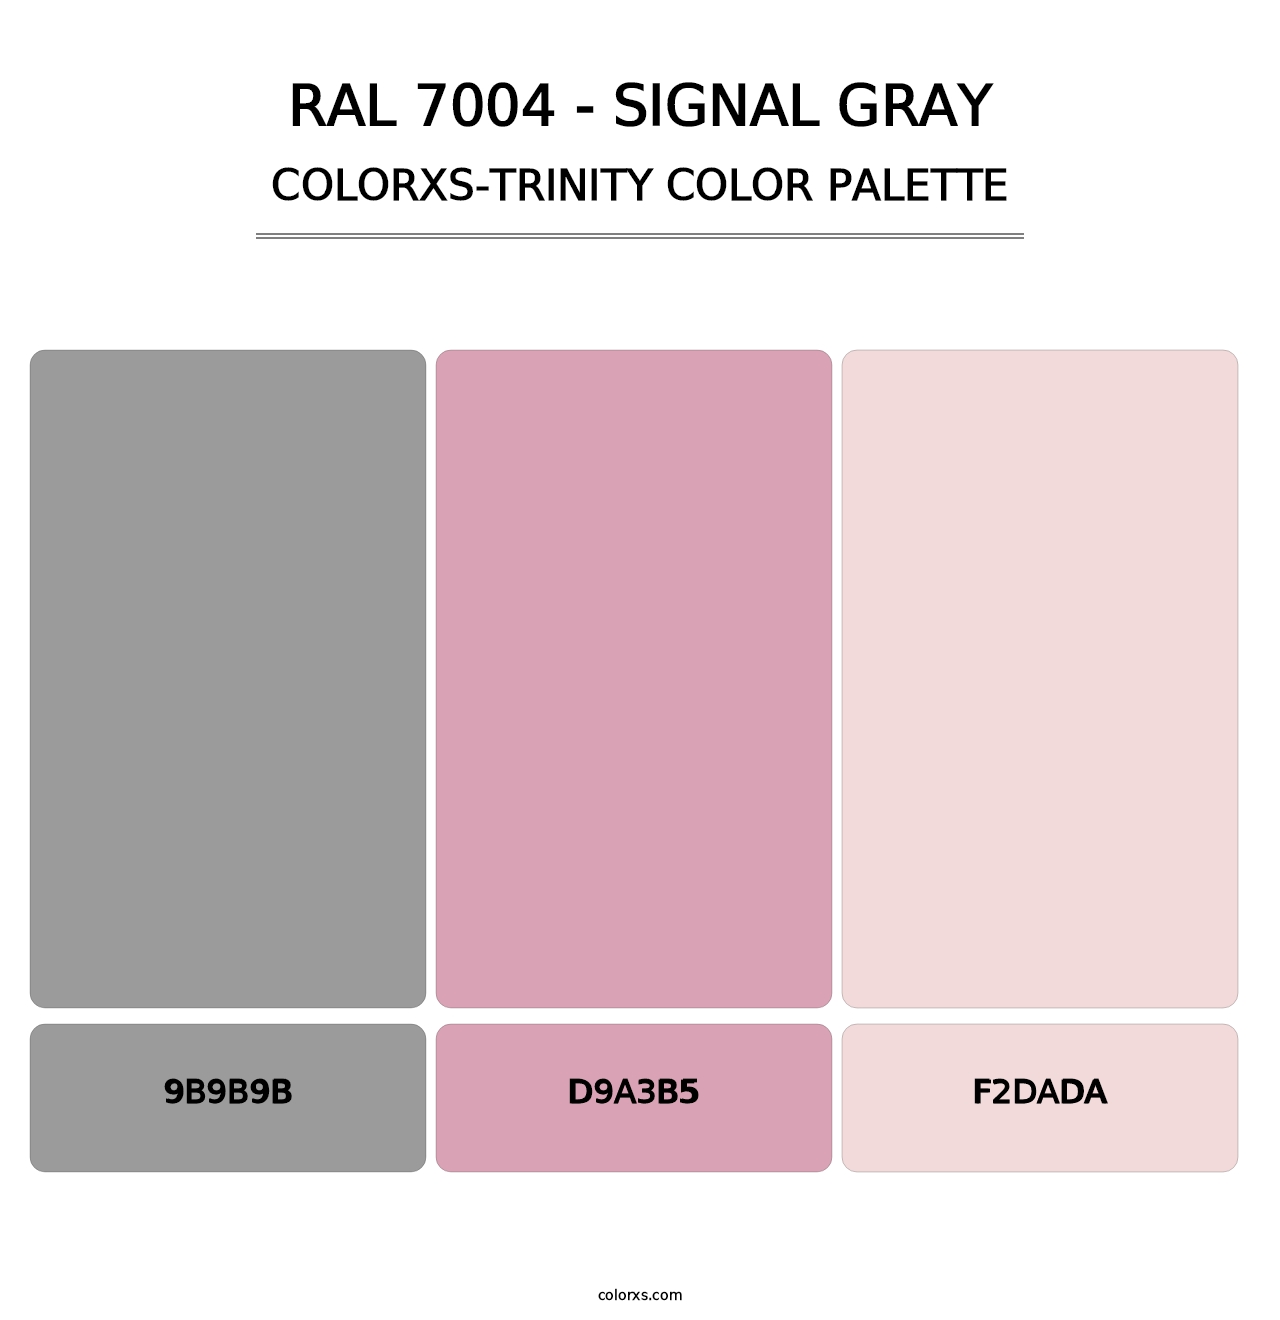 RAL 7004 - Signal Gray - Colorxs Trinity Palette